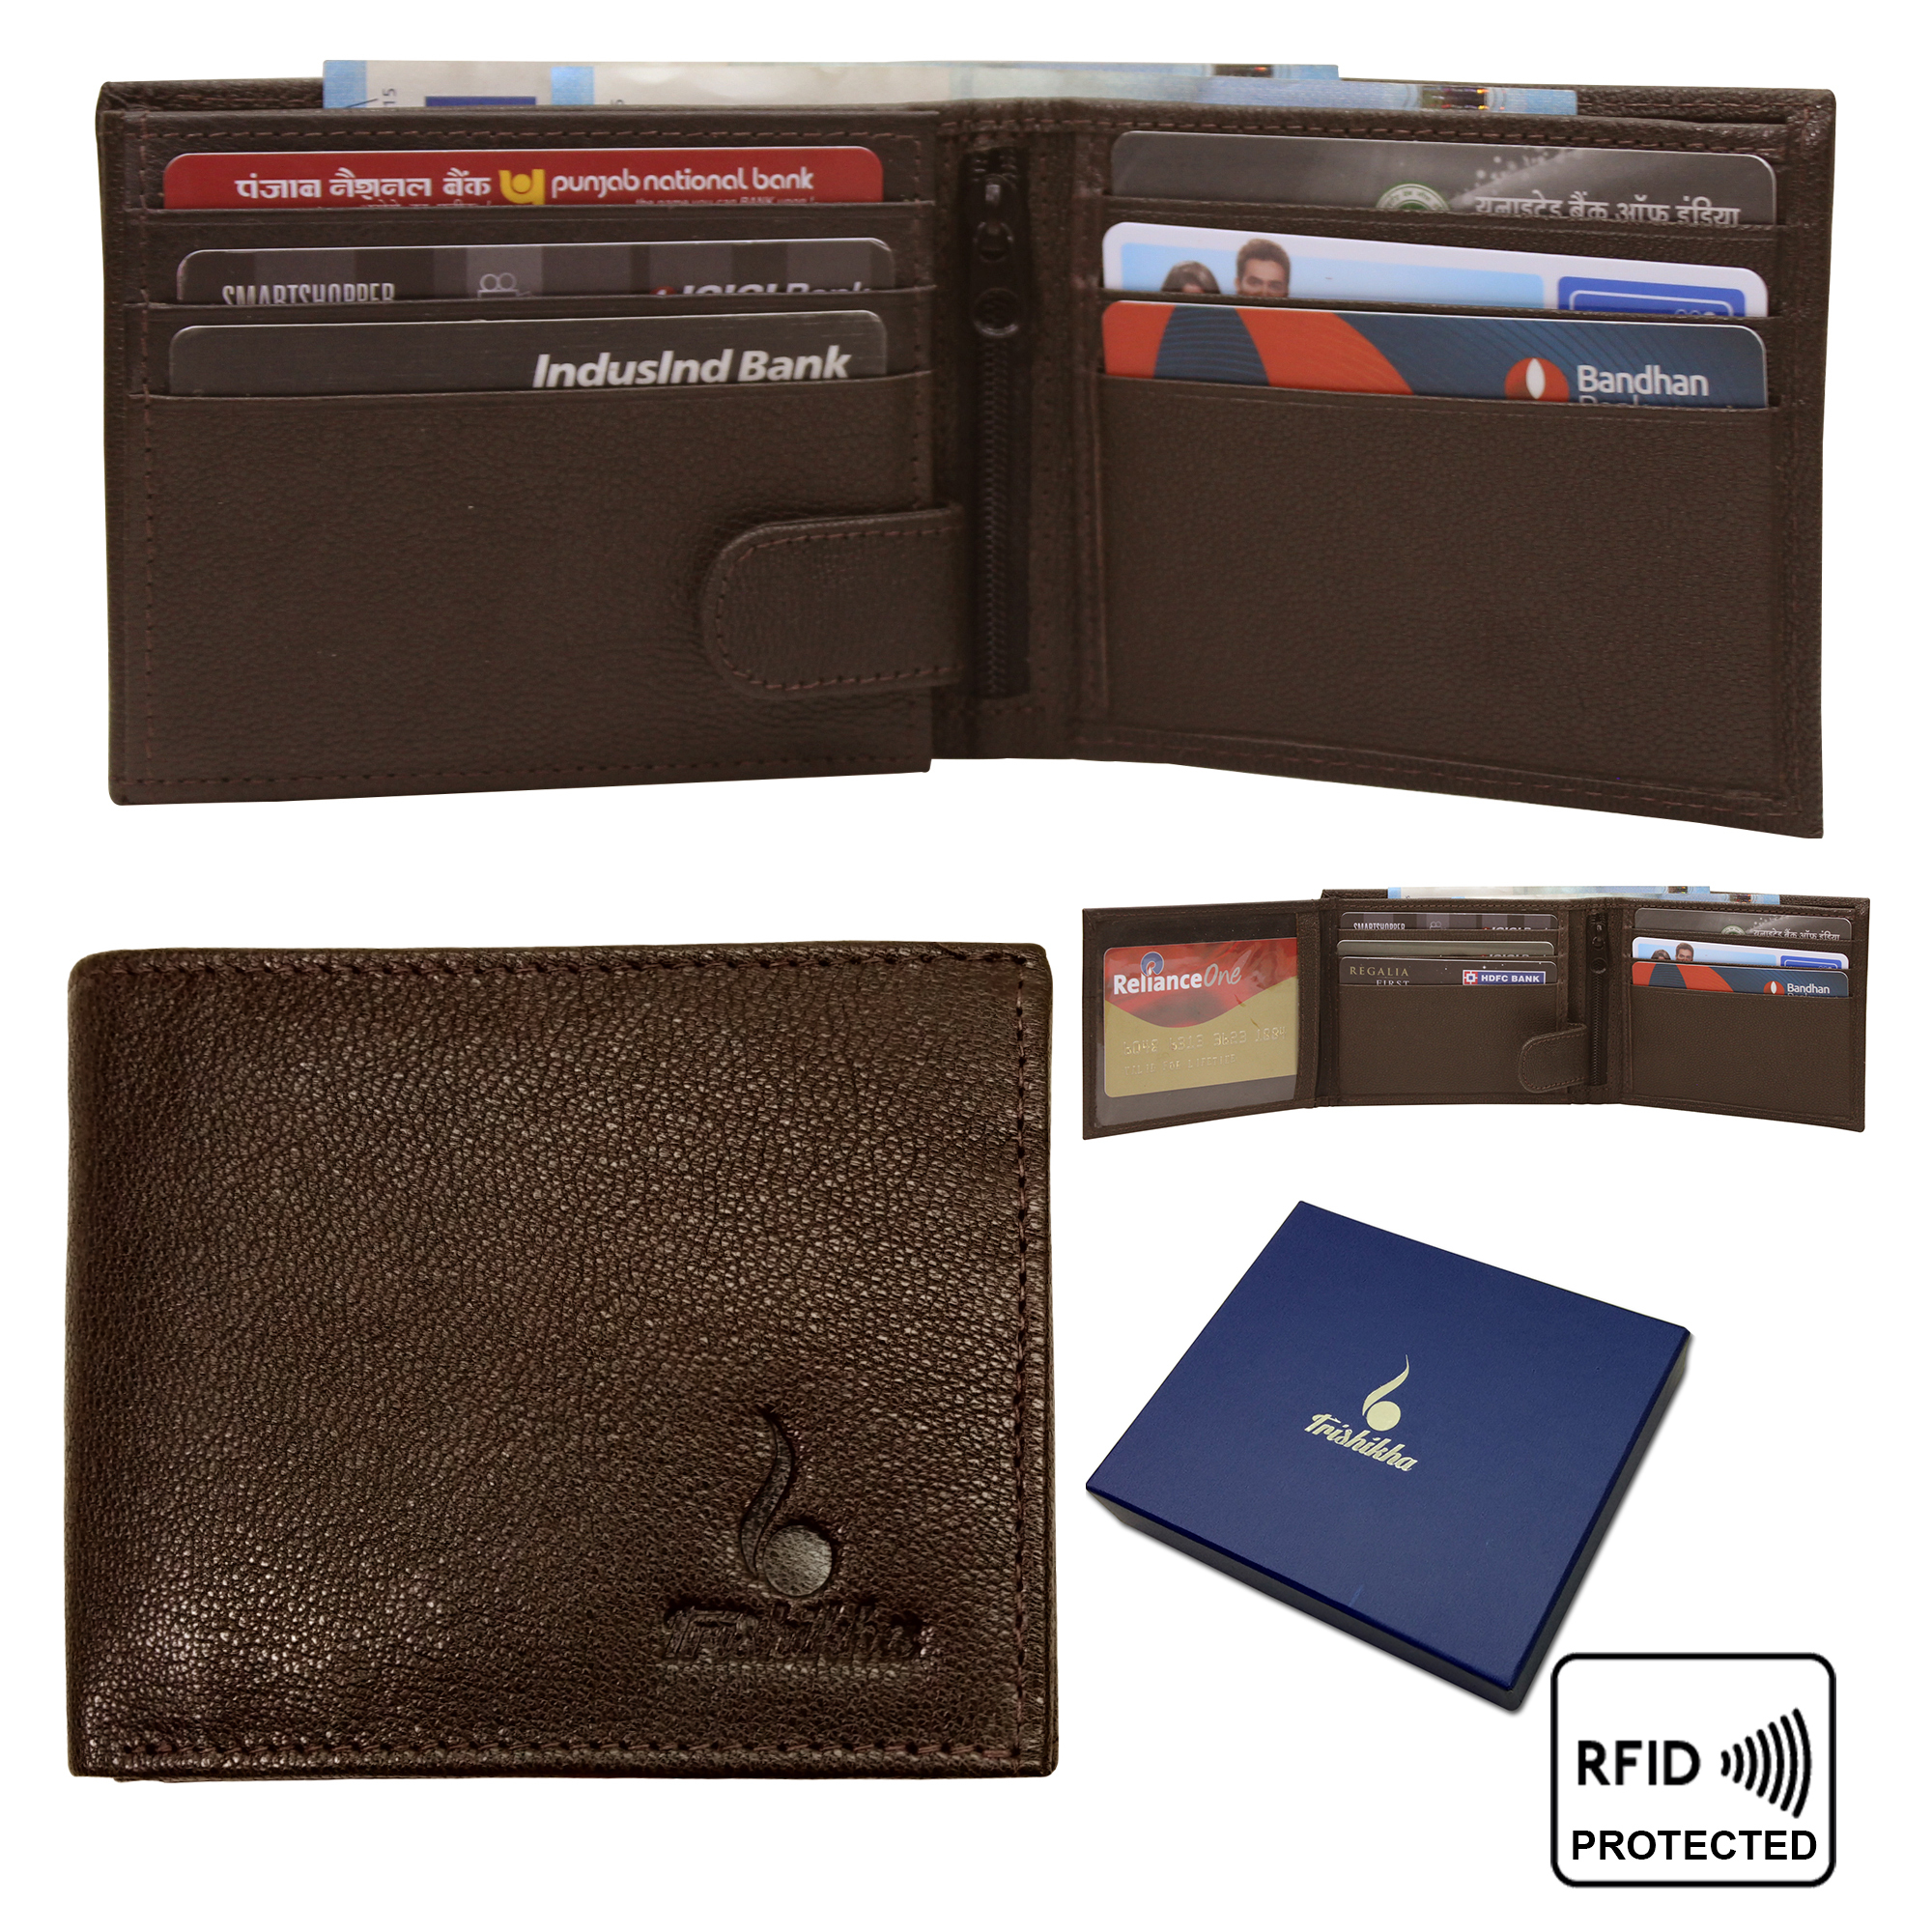 Leather Bifold Wallet For Men